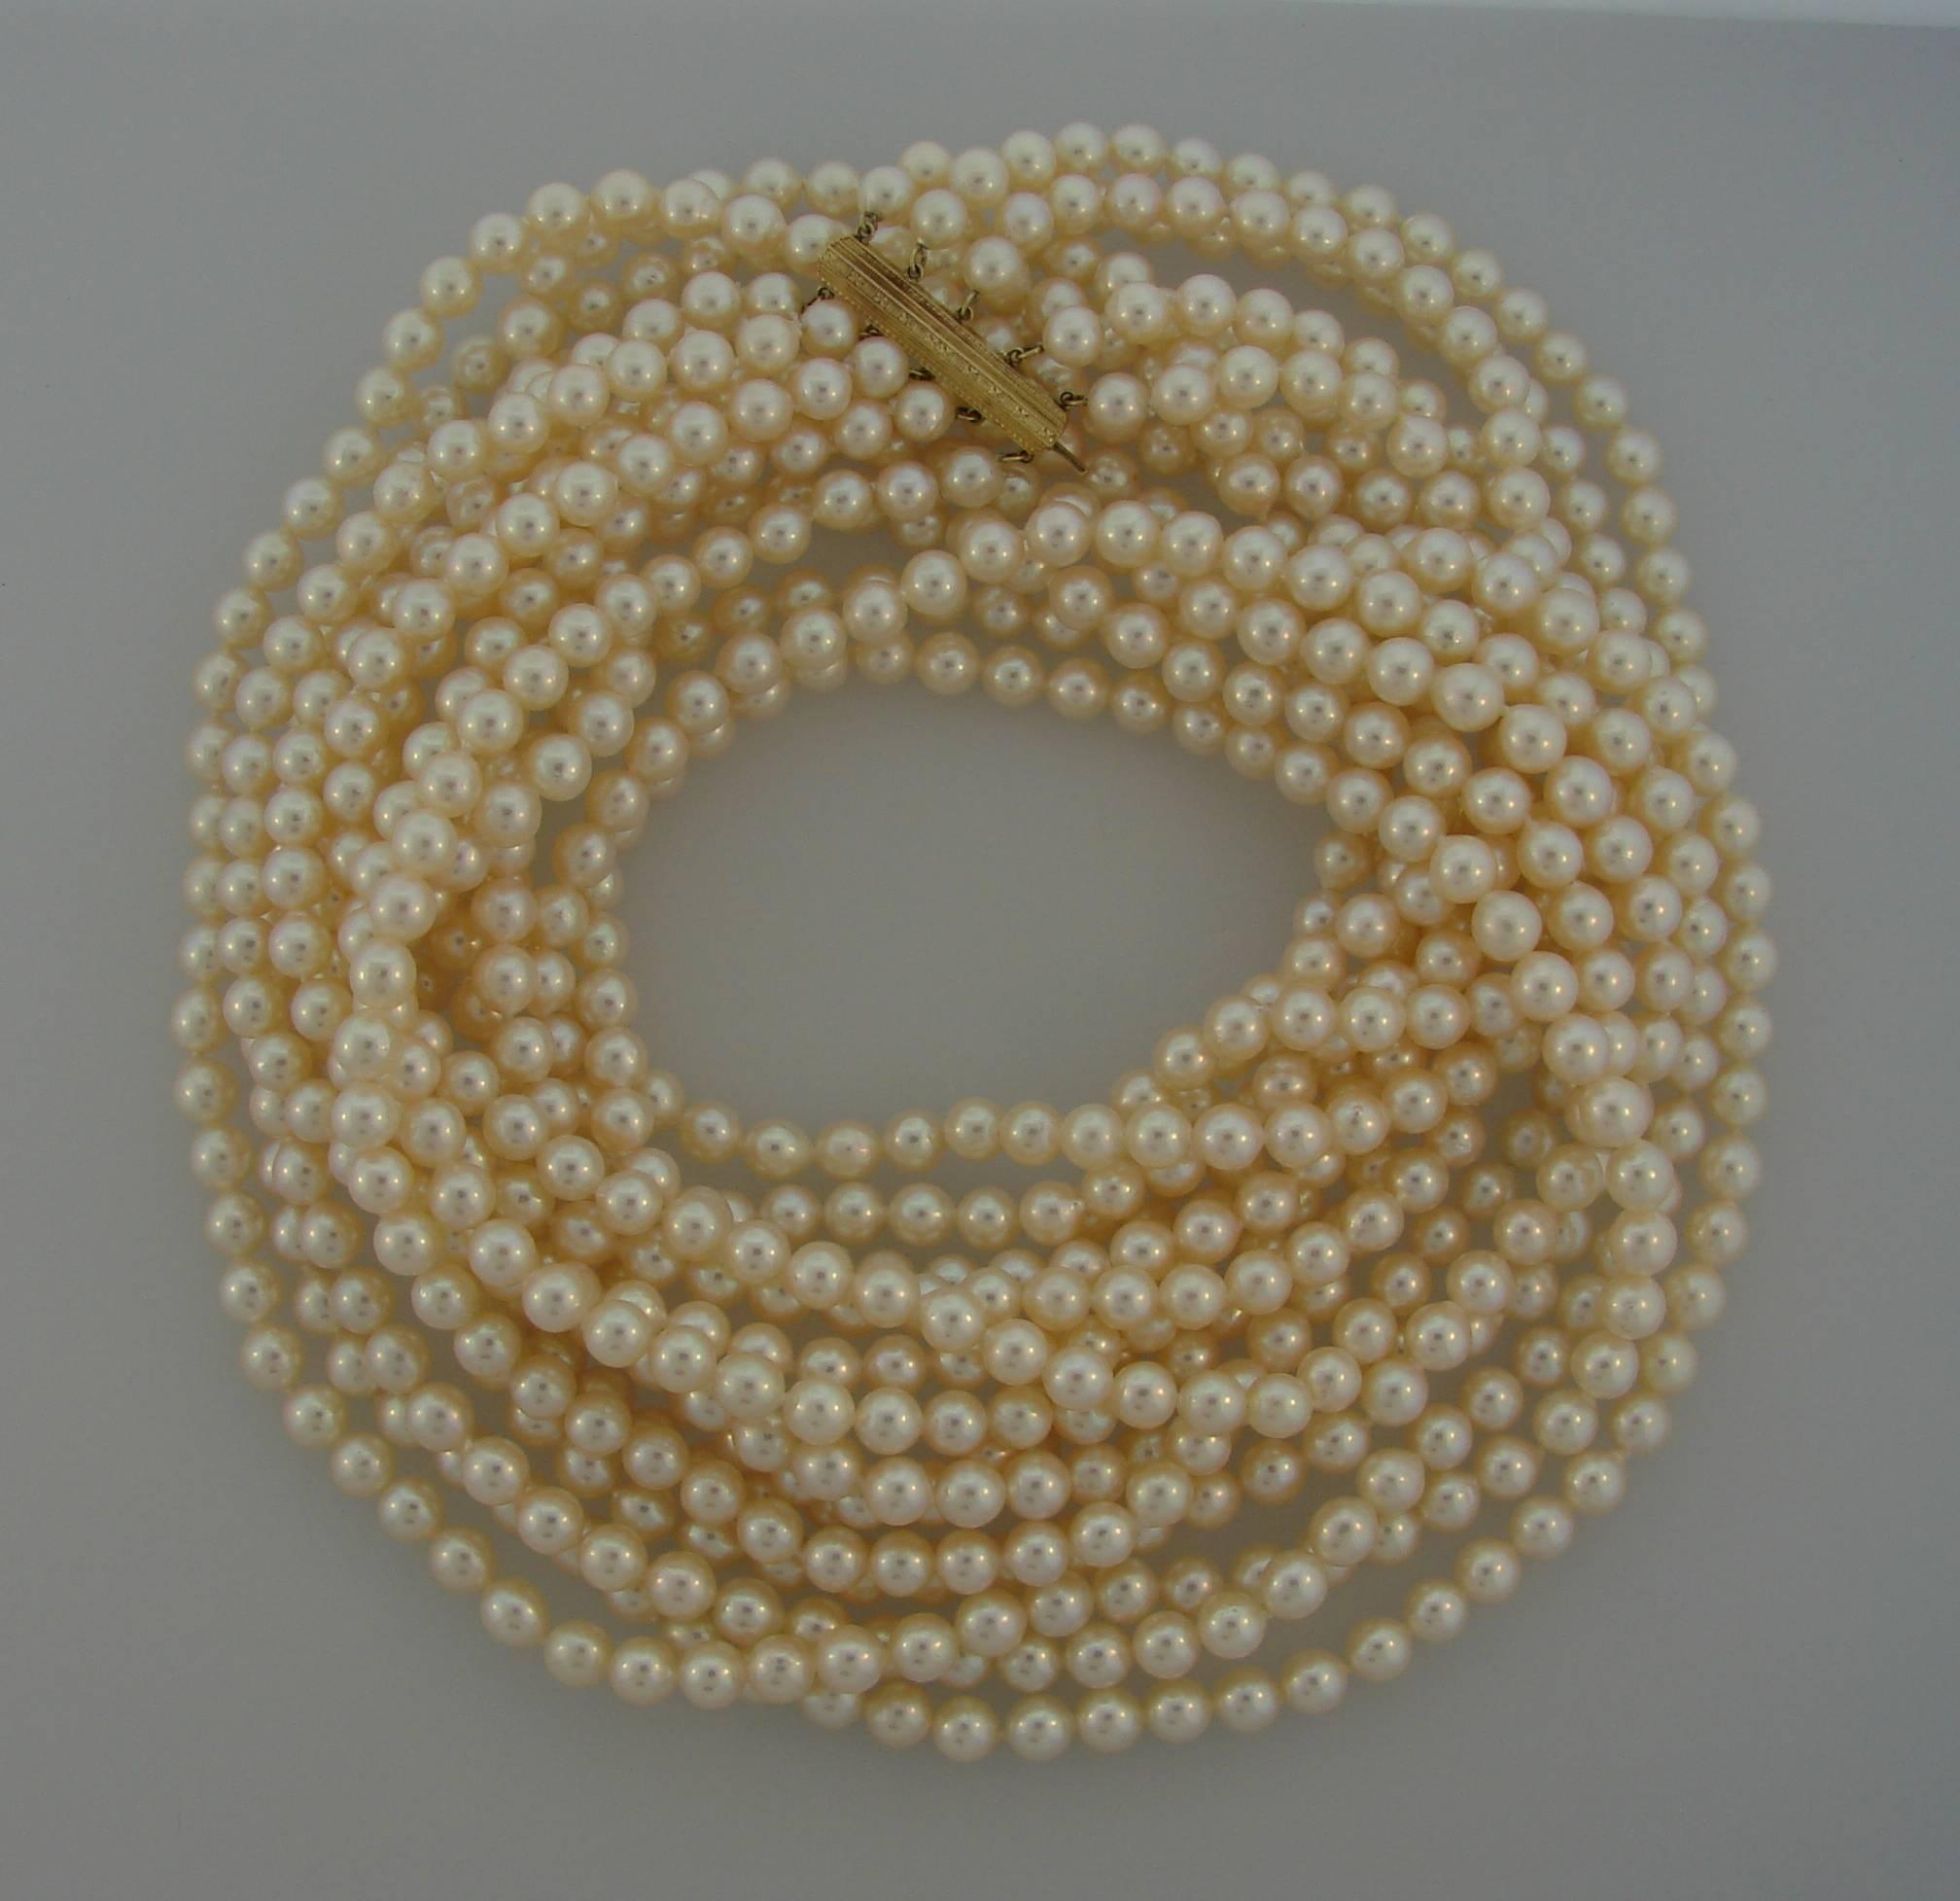 Beautiful, classy and timeless five-strand long necklace created by Mikimoto. Versatile and wearable, the necklace is a great addition to your jewelry collection. 
The pearls measure in average 6.2 mm in diameter, have excellent luster and very well